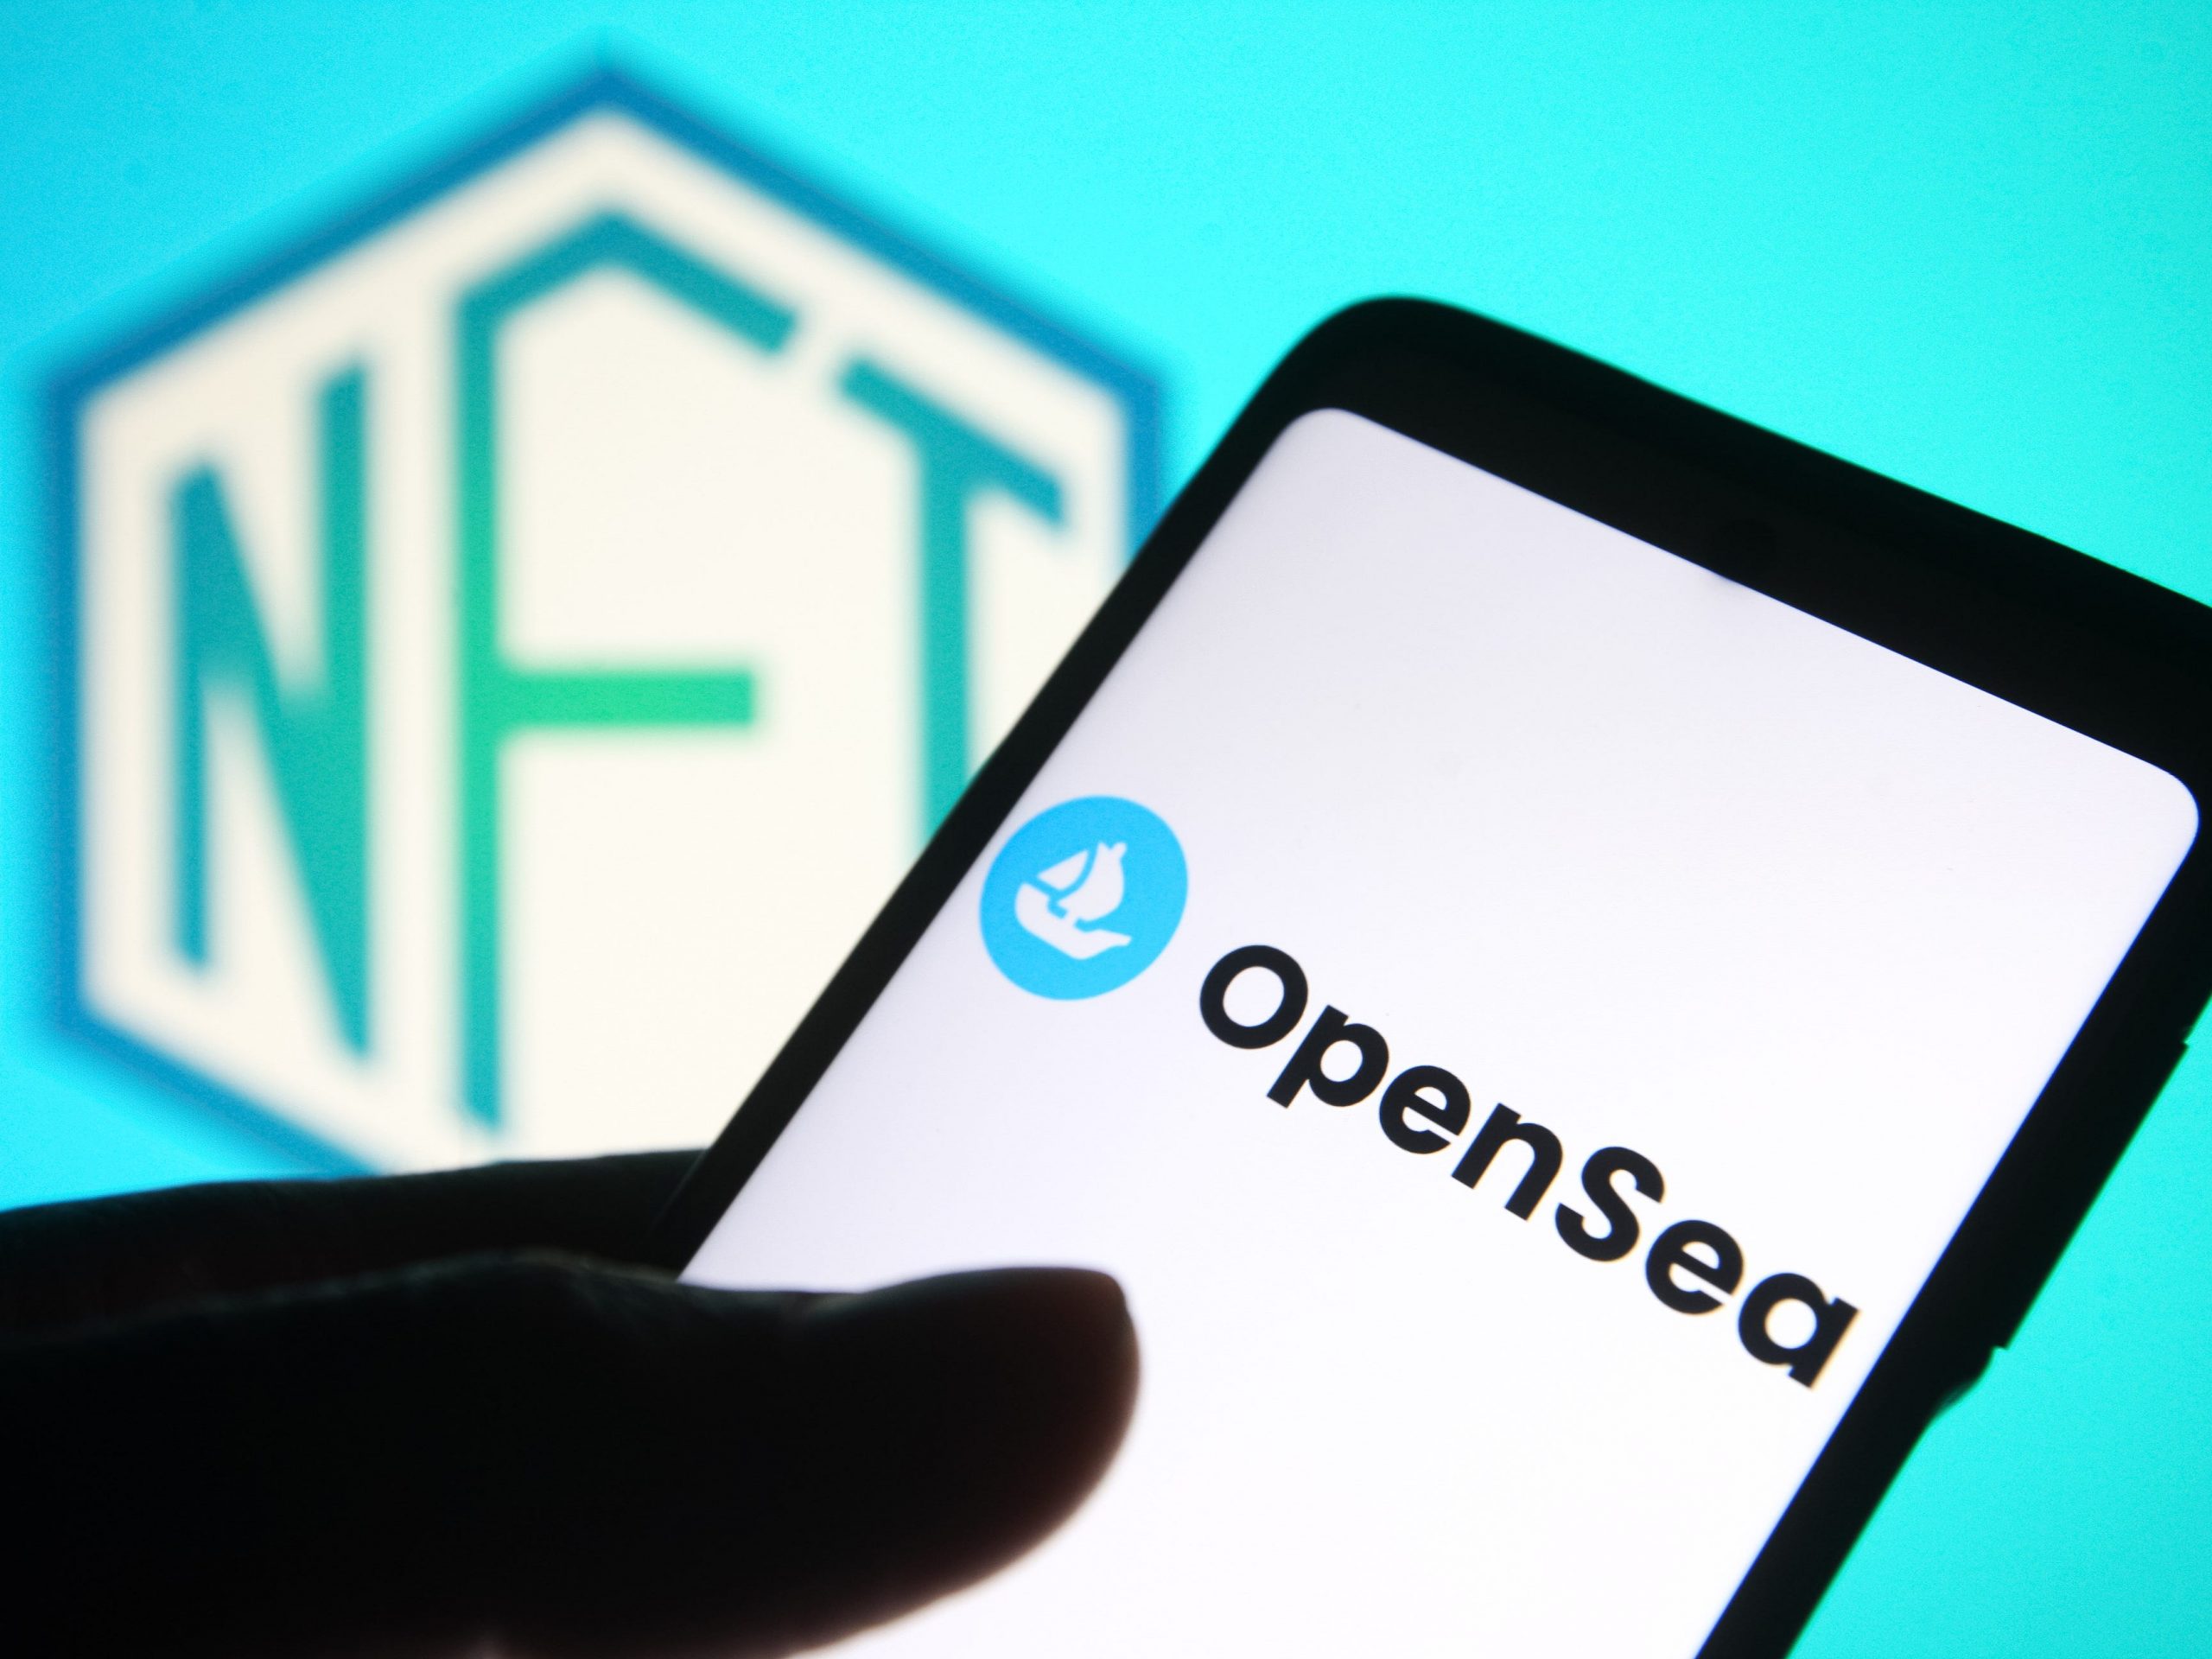 An OpenSea logo of an online marketplace for non-fungible tokens is seen on a smartphone screen and a NFT (Non-fungible token) sign in the background.